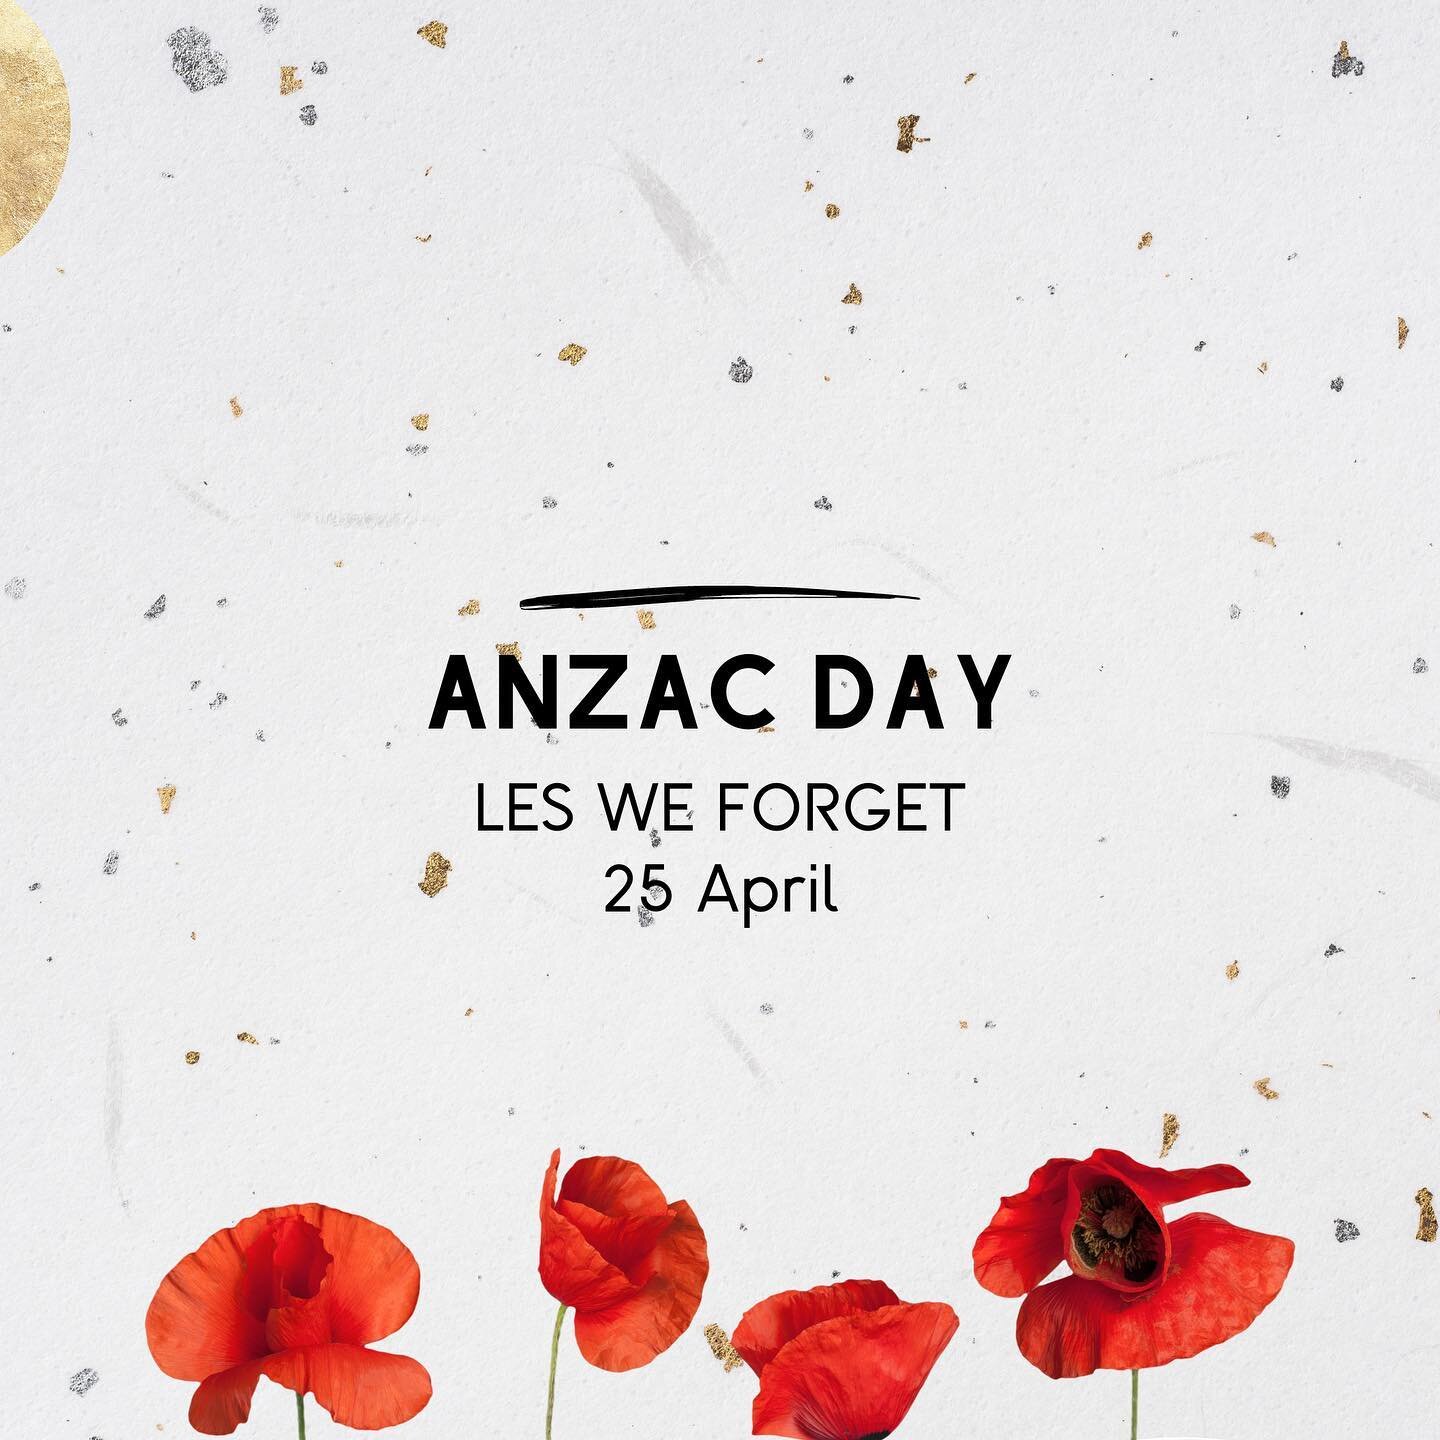 In remembrance of ANZAC Day, Musashi restaurant and Kojiro kitchen honour the courage and sacrifices of our NZ and Australian heroes. As we come together to appreciate the bonds that unite us, let's share a moment of gratitude for those who served. L